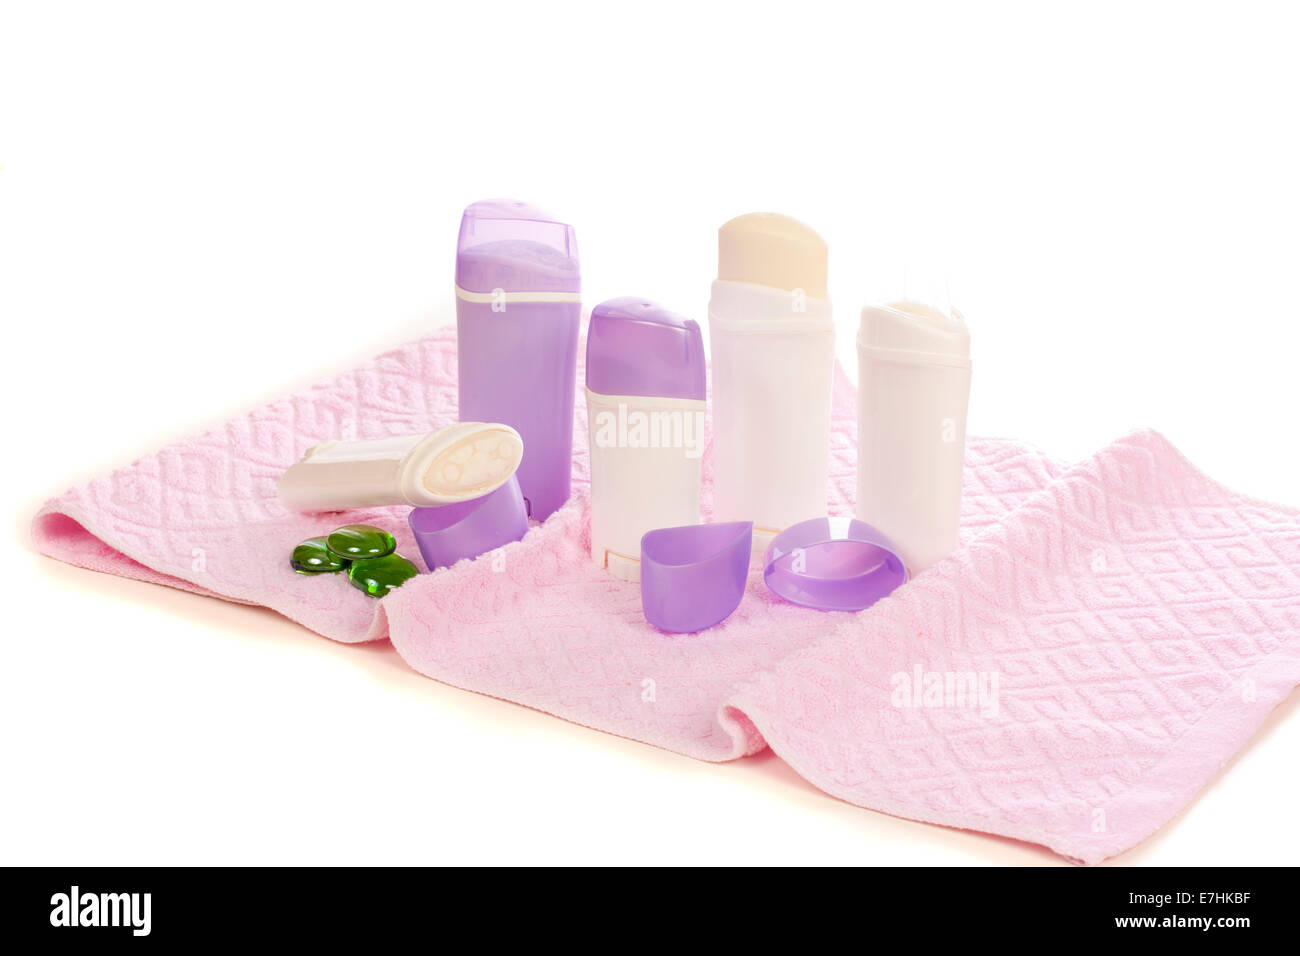 Deodorants placed on the towel isolated over white background Stock Photo